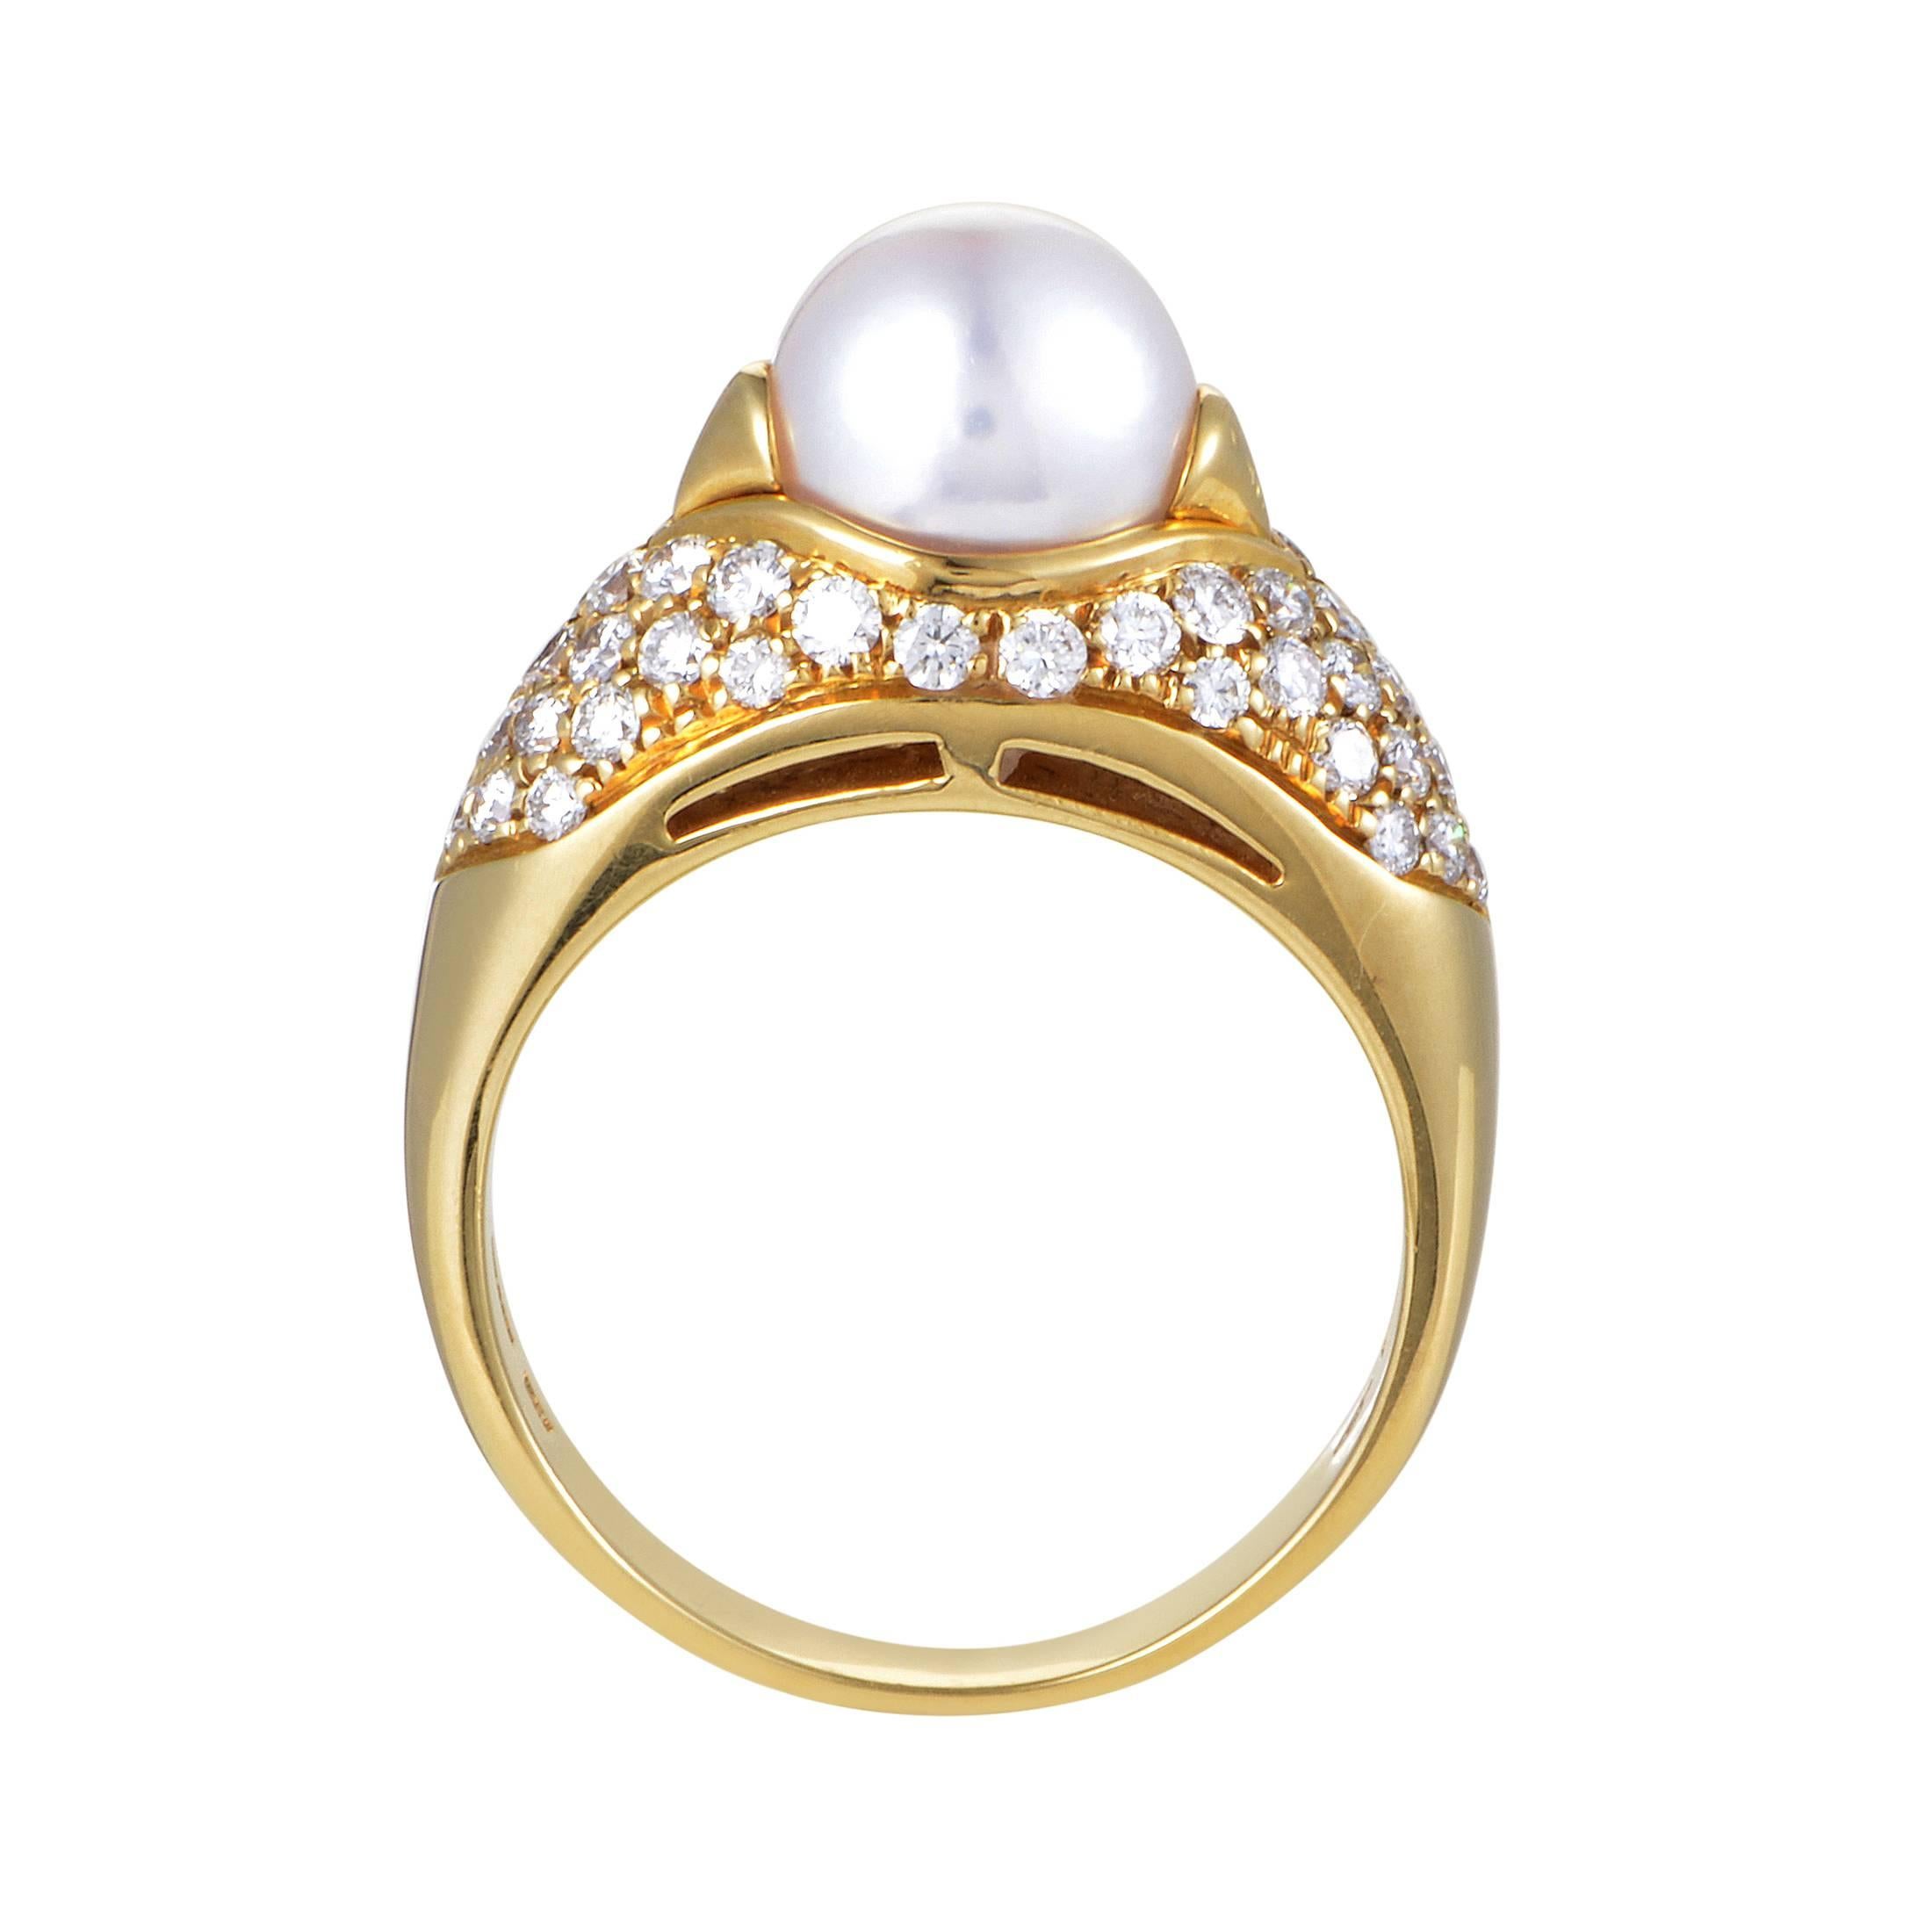 Brilliantly setting up the stage for the magnificent pearl to shine with its silky luster, the precious 18K yellow gold and sparkling diamonds totaling 0.75ct produce an enchanting sight in this gorgeous ring from Bulgari.
Ring Size: 7.75 (55